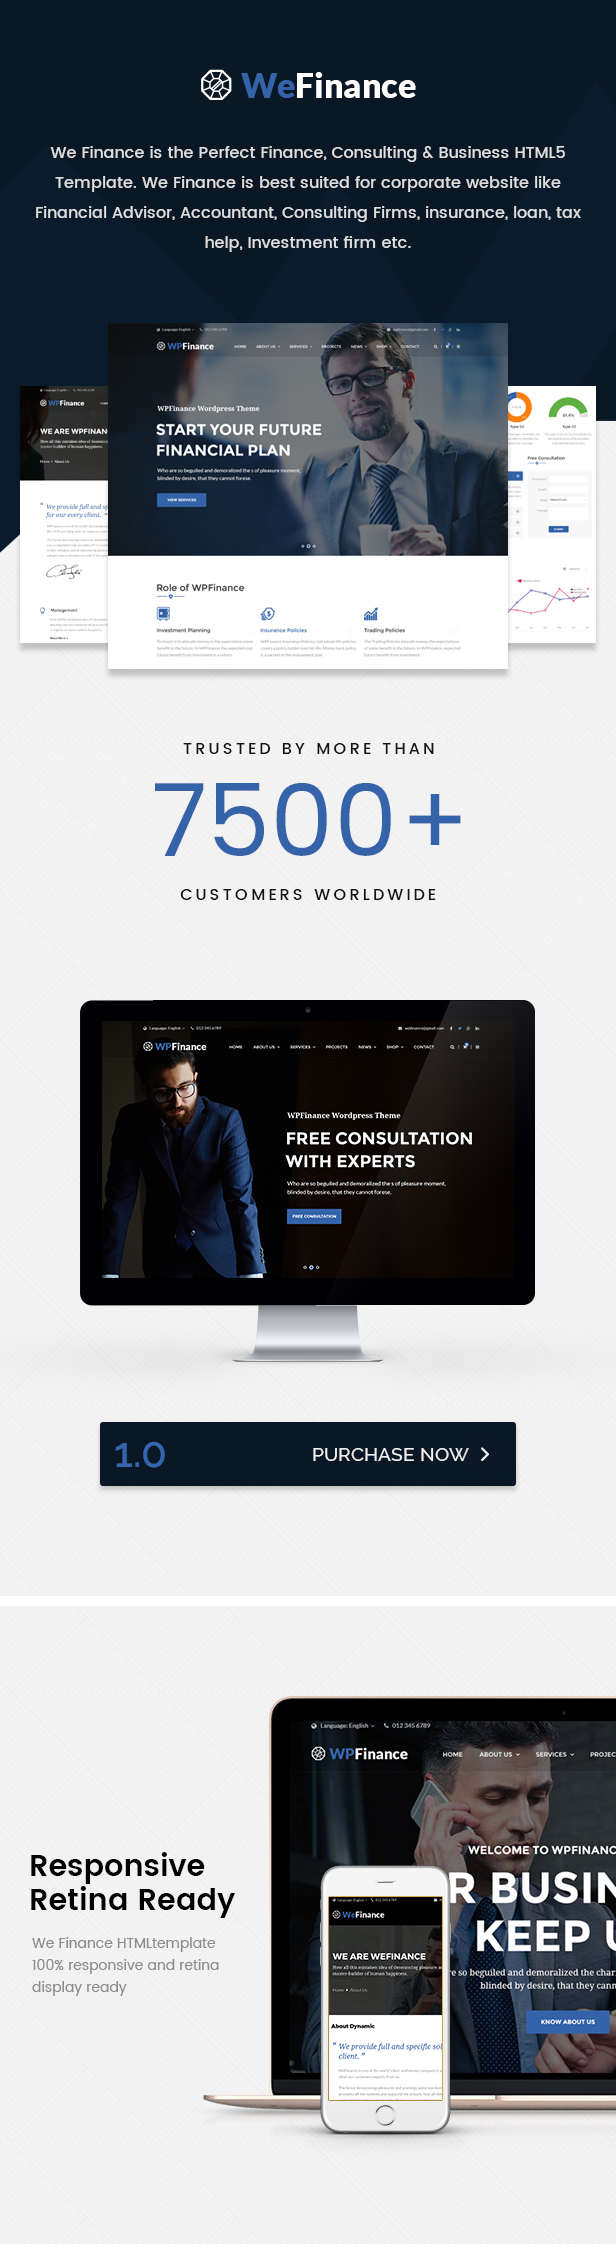 We Finance - Consulting Business, Finance HTML5 Template - 1